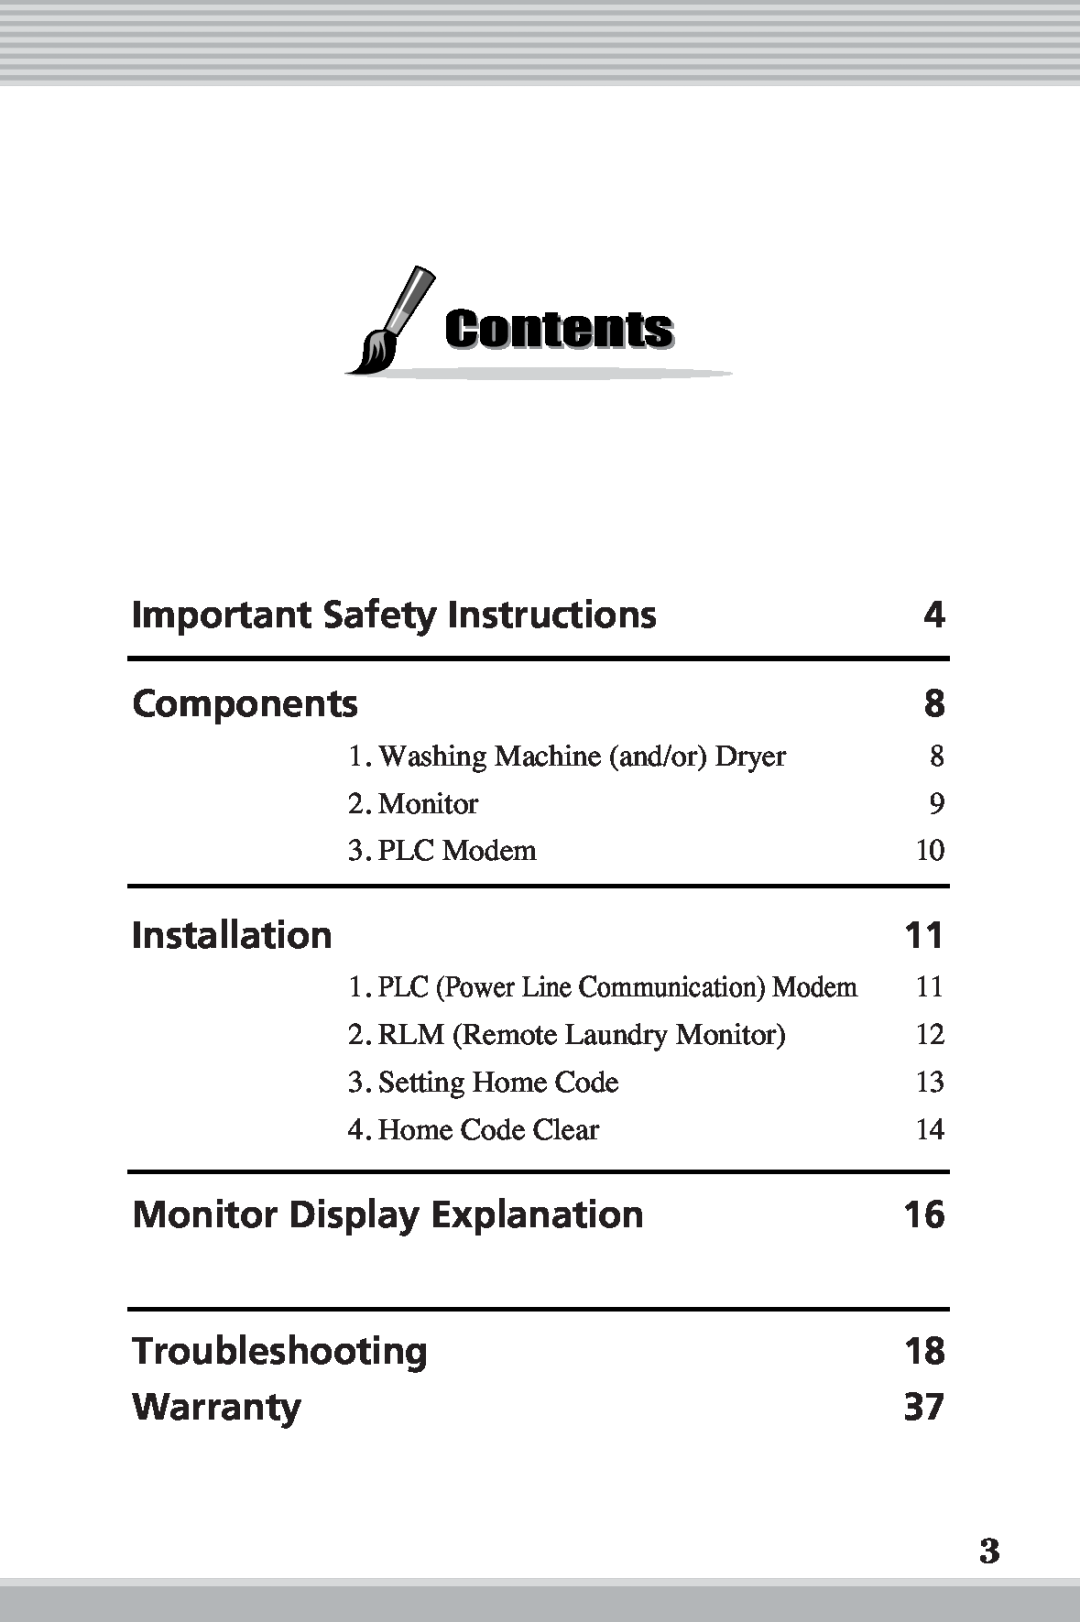 LG Electronics RLM10 Contents, Important Safety Instructions, Components, Installation, Monitor Display Explanation 